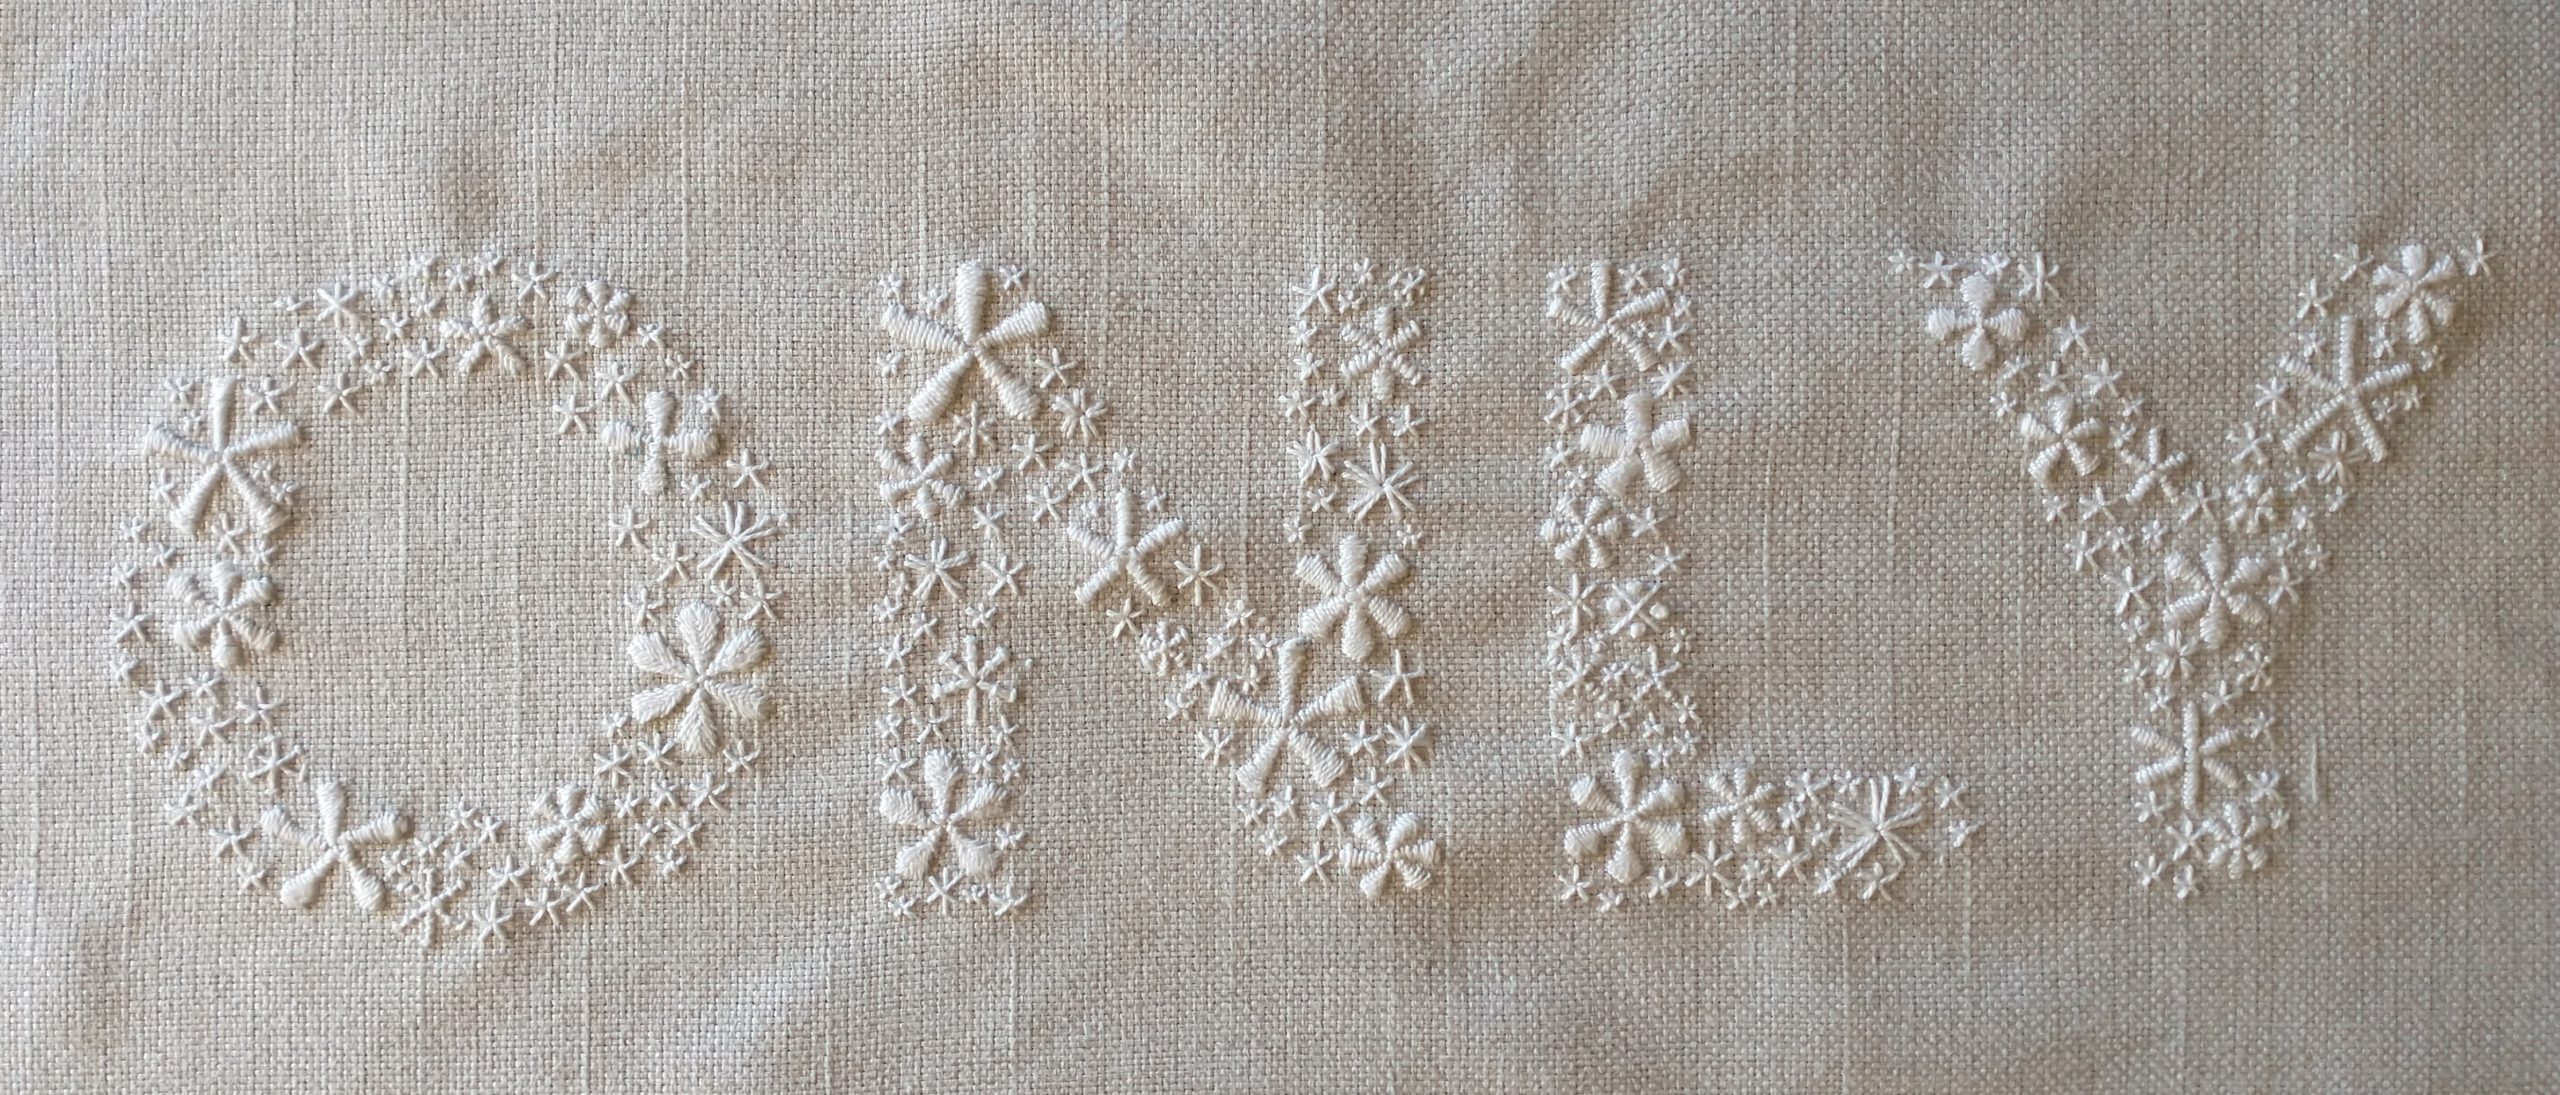 

											Jami Porter Lara</b>

											<em>
												Terms and Conditions</em> 

											<h4>
												August 13 - November 9, 2021											</h4>

		                																																													<i>Tête-à-Tête,</i>  
																																								2021, 
																																								embroidered couch (detail), 
																																								26 x 62 x 32 inches (overall) 
																								
		                				